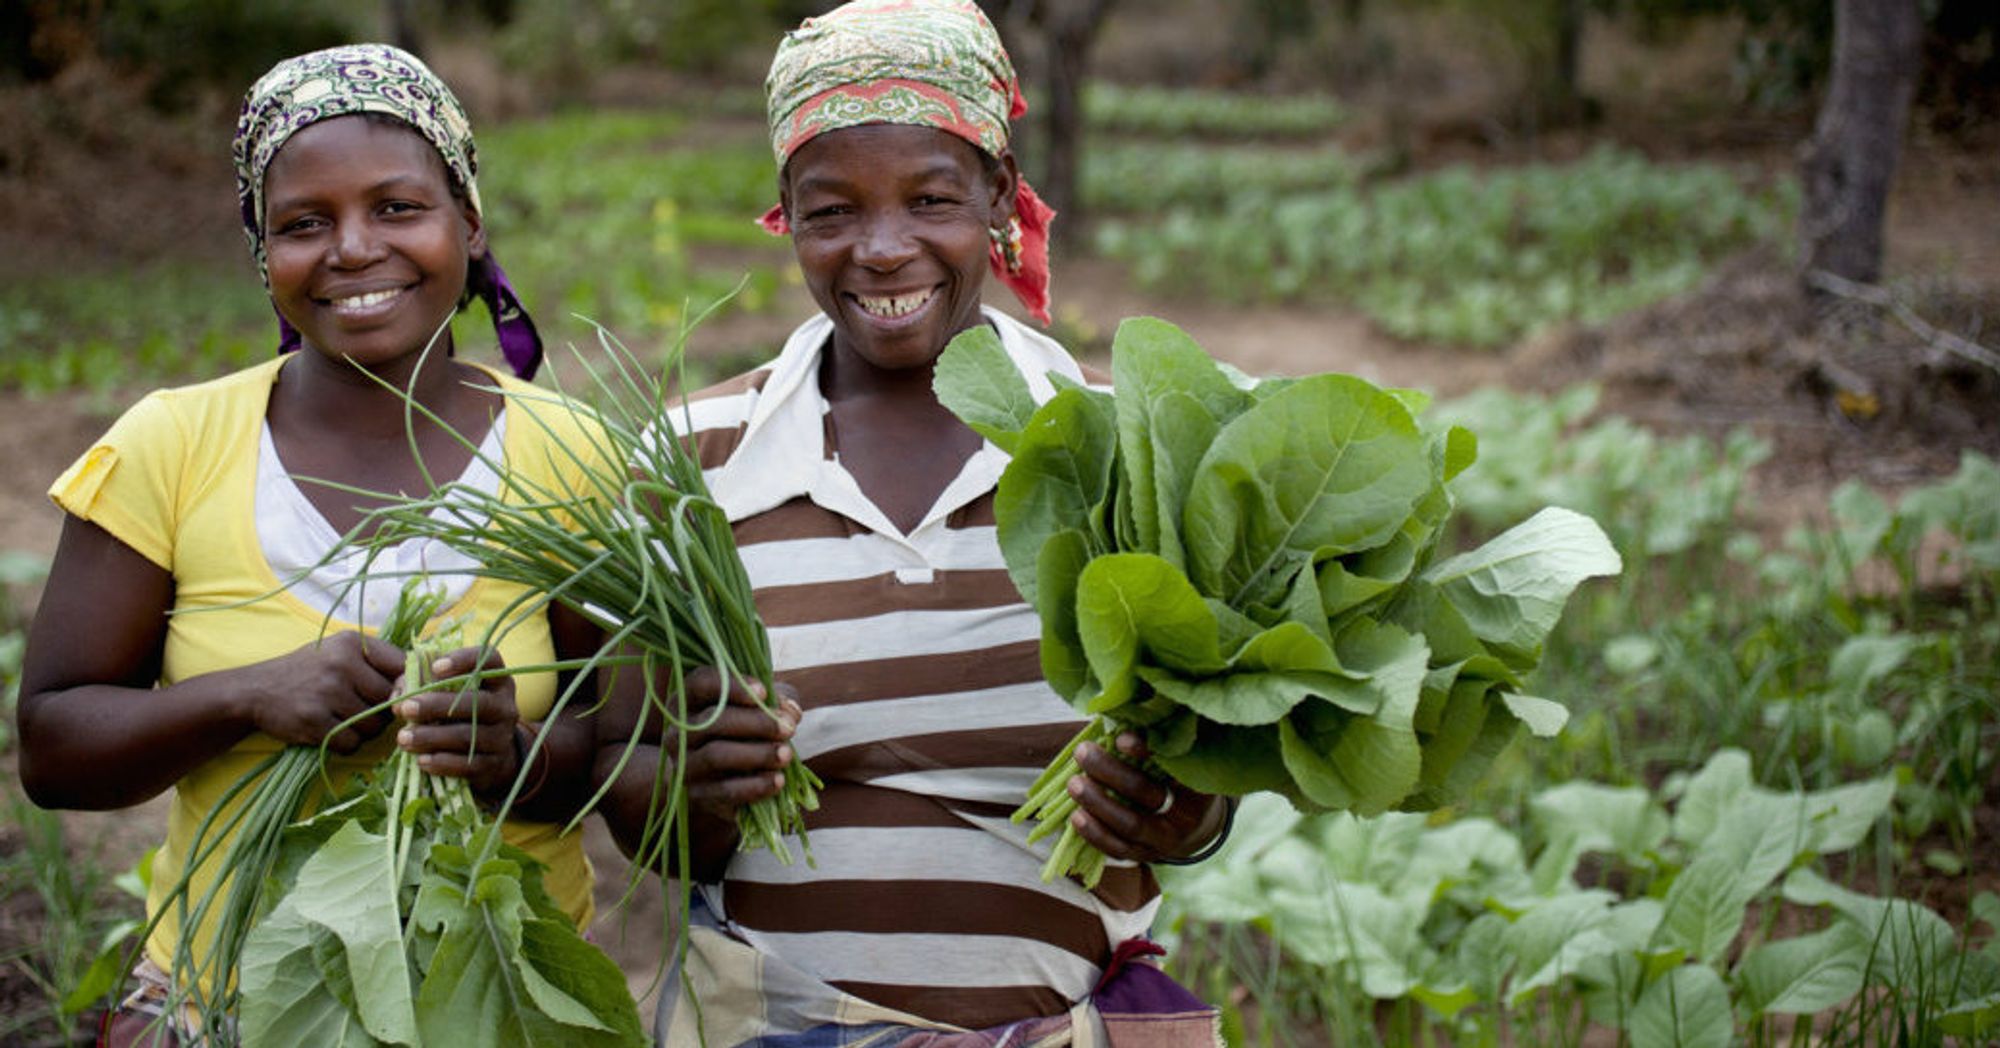 Promoting local vegetables R&D to benefit smallholders - Sub-Saharan Africa